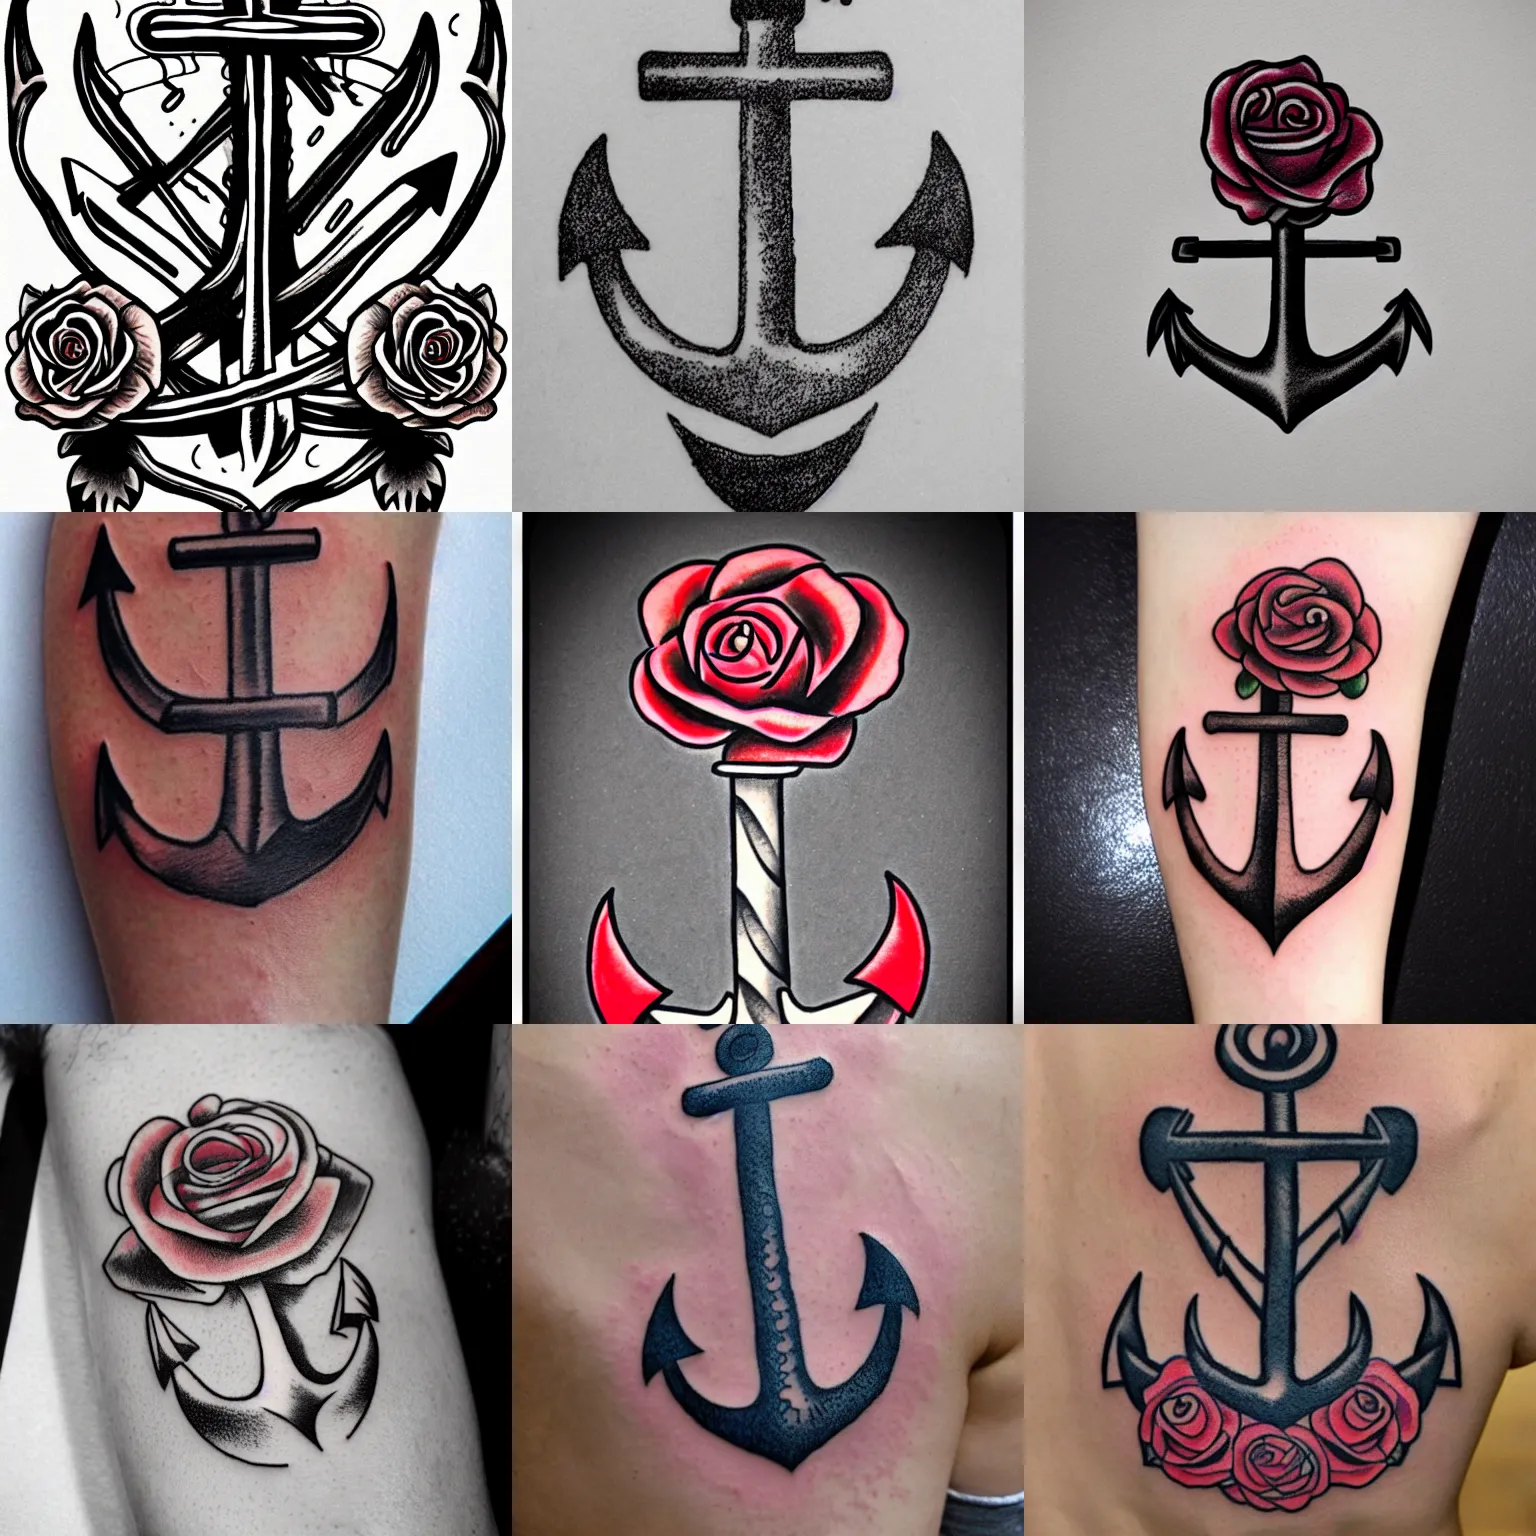 traditional #anchor and #rose #tattoo | Peter Ferrel | Flickr